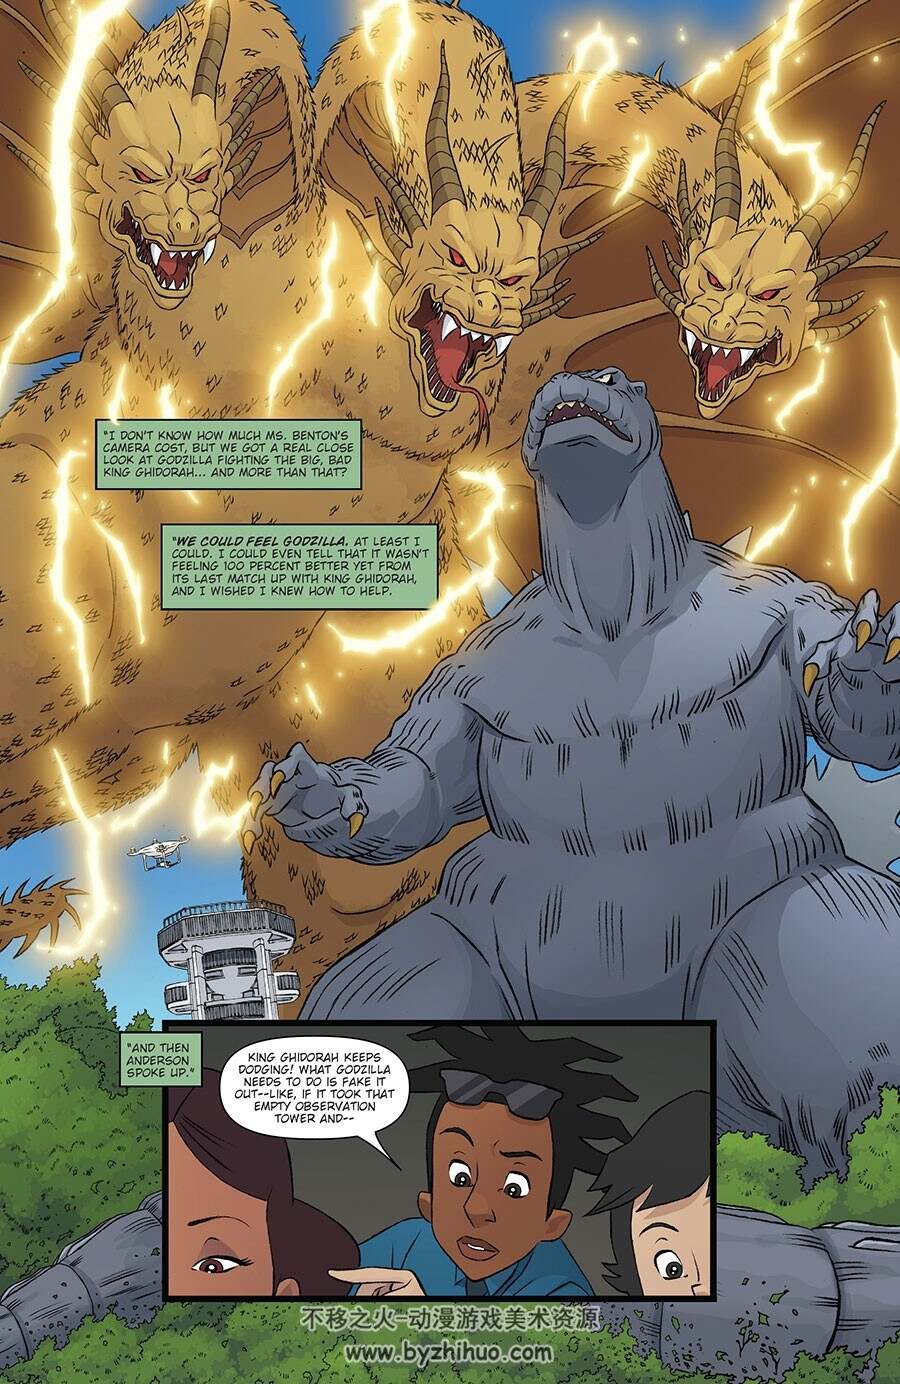 Godzilla: Monsters & Protectors All Hail the King! 第5册 漫画下载